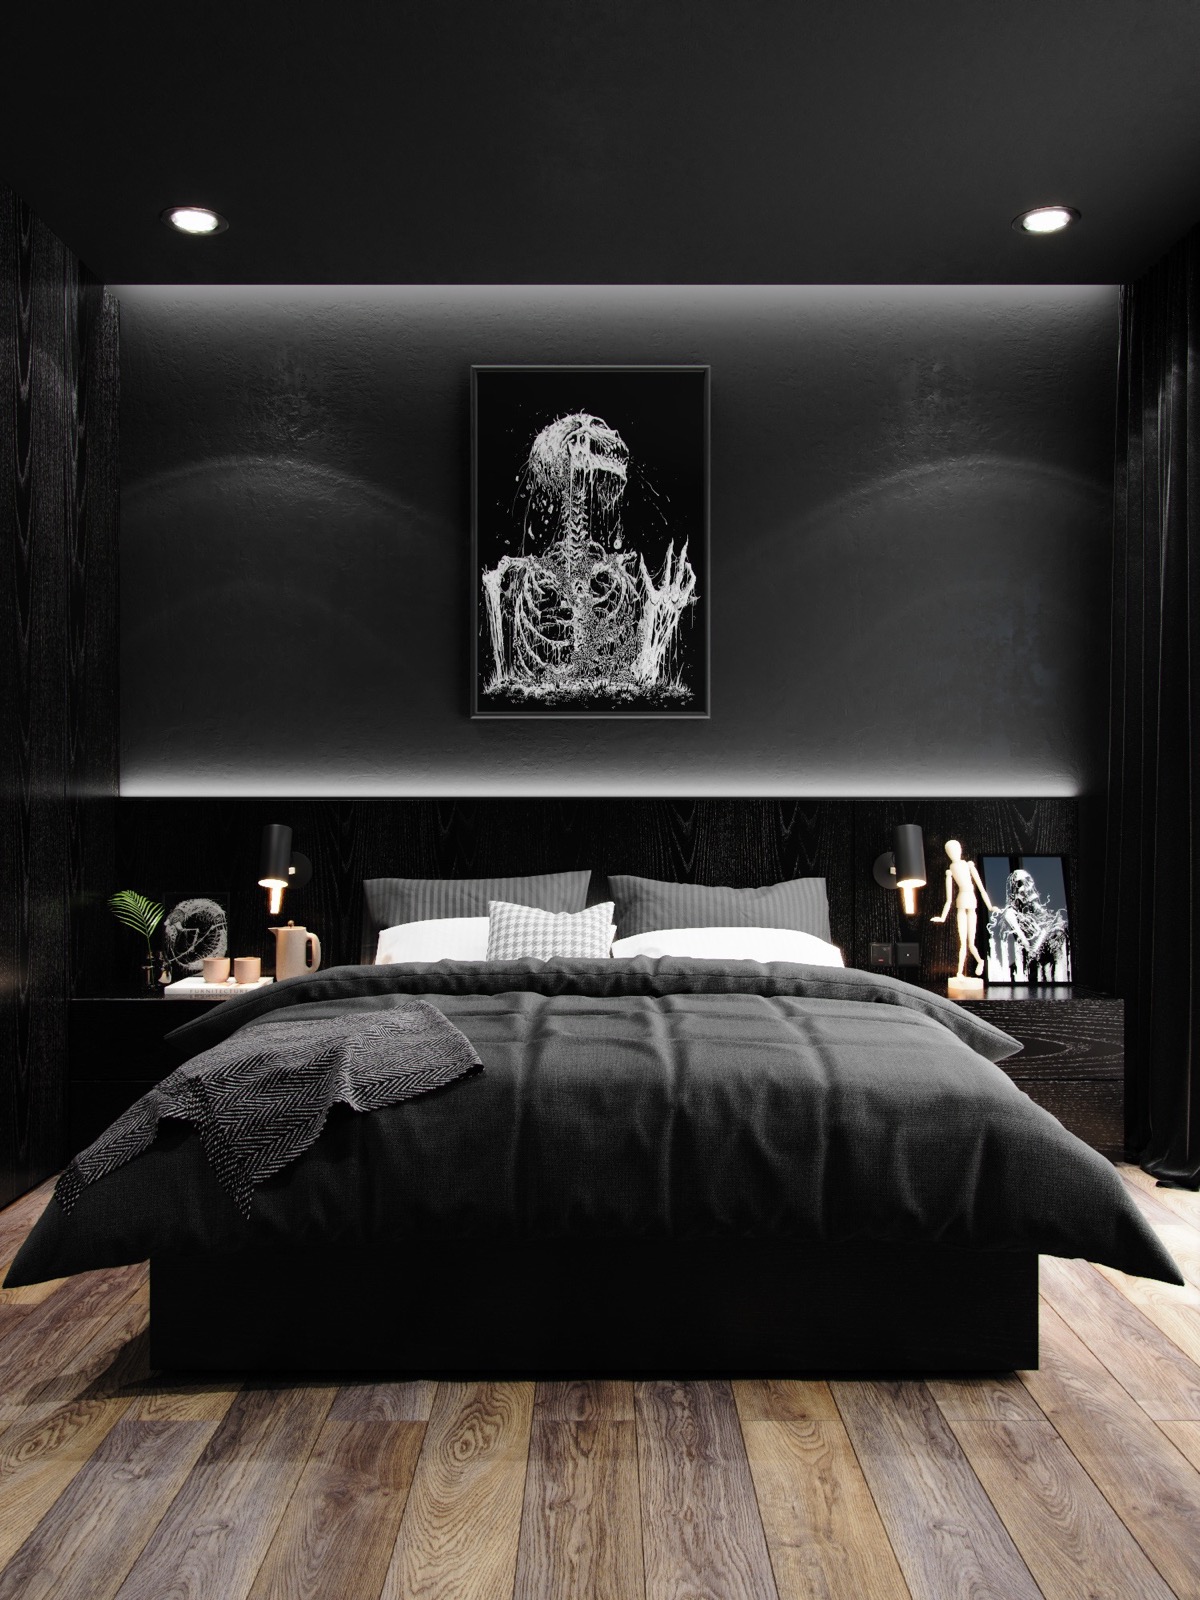 51 Dark Bedroom Ideas With Tips And Accessories To Help You Design ...